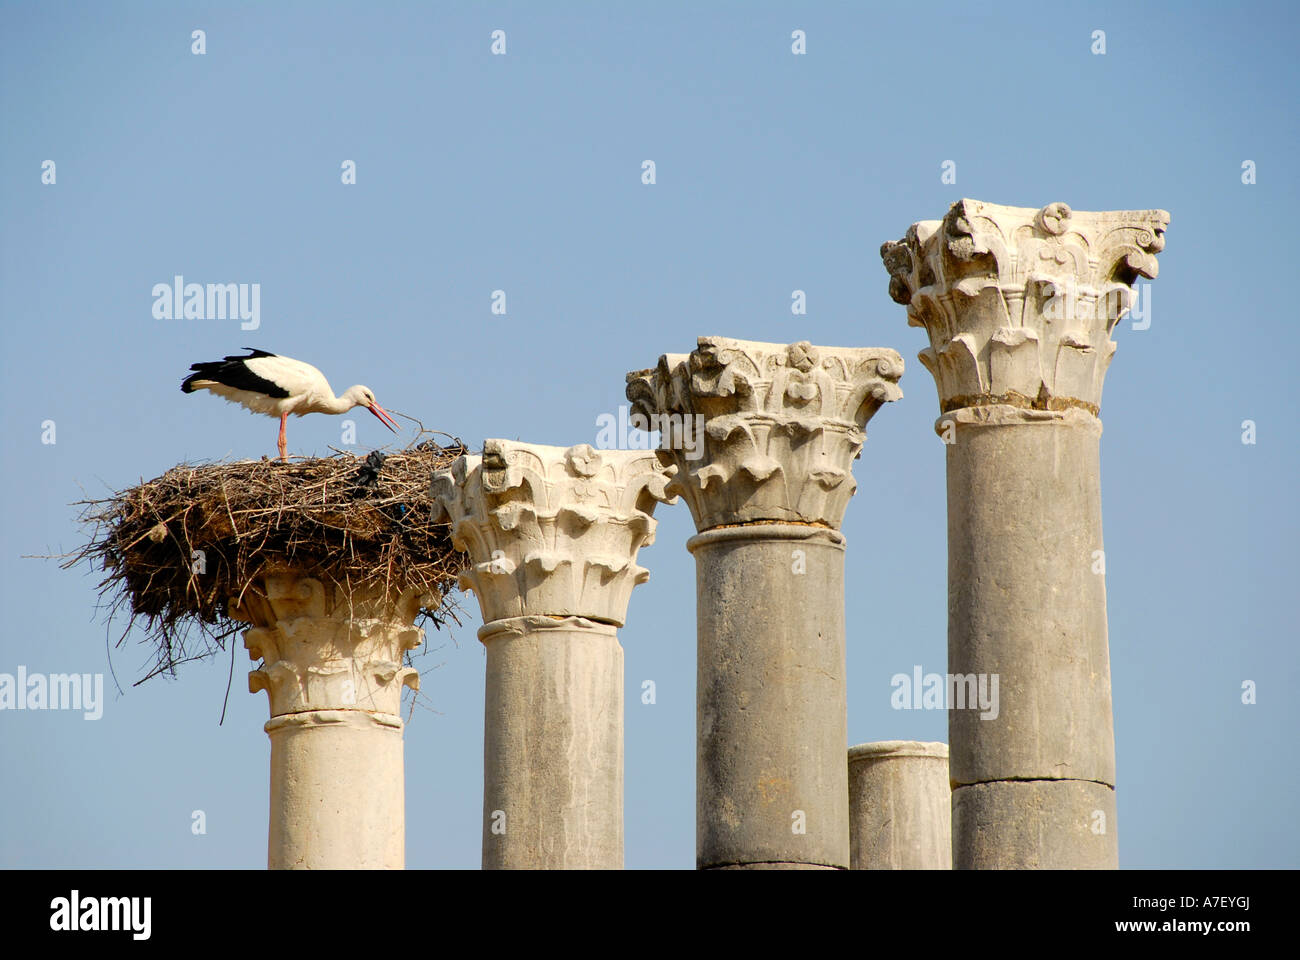 Pillars with a storks nest White Stork Ciconia ciconia archaeological excavation of antique Roman city Volubilis Morocco Stock Photo